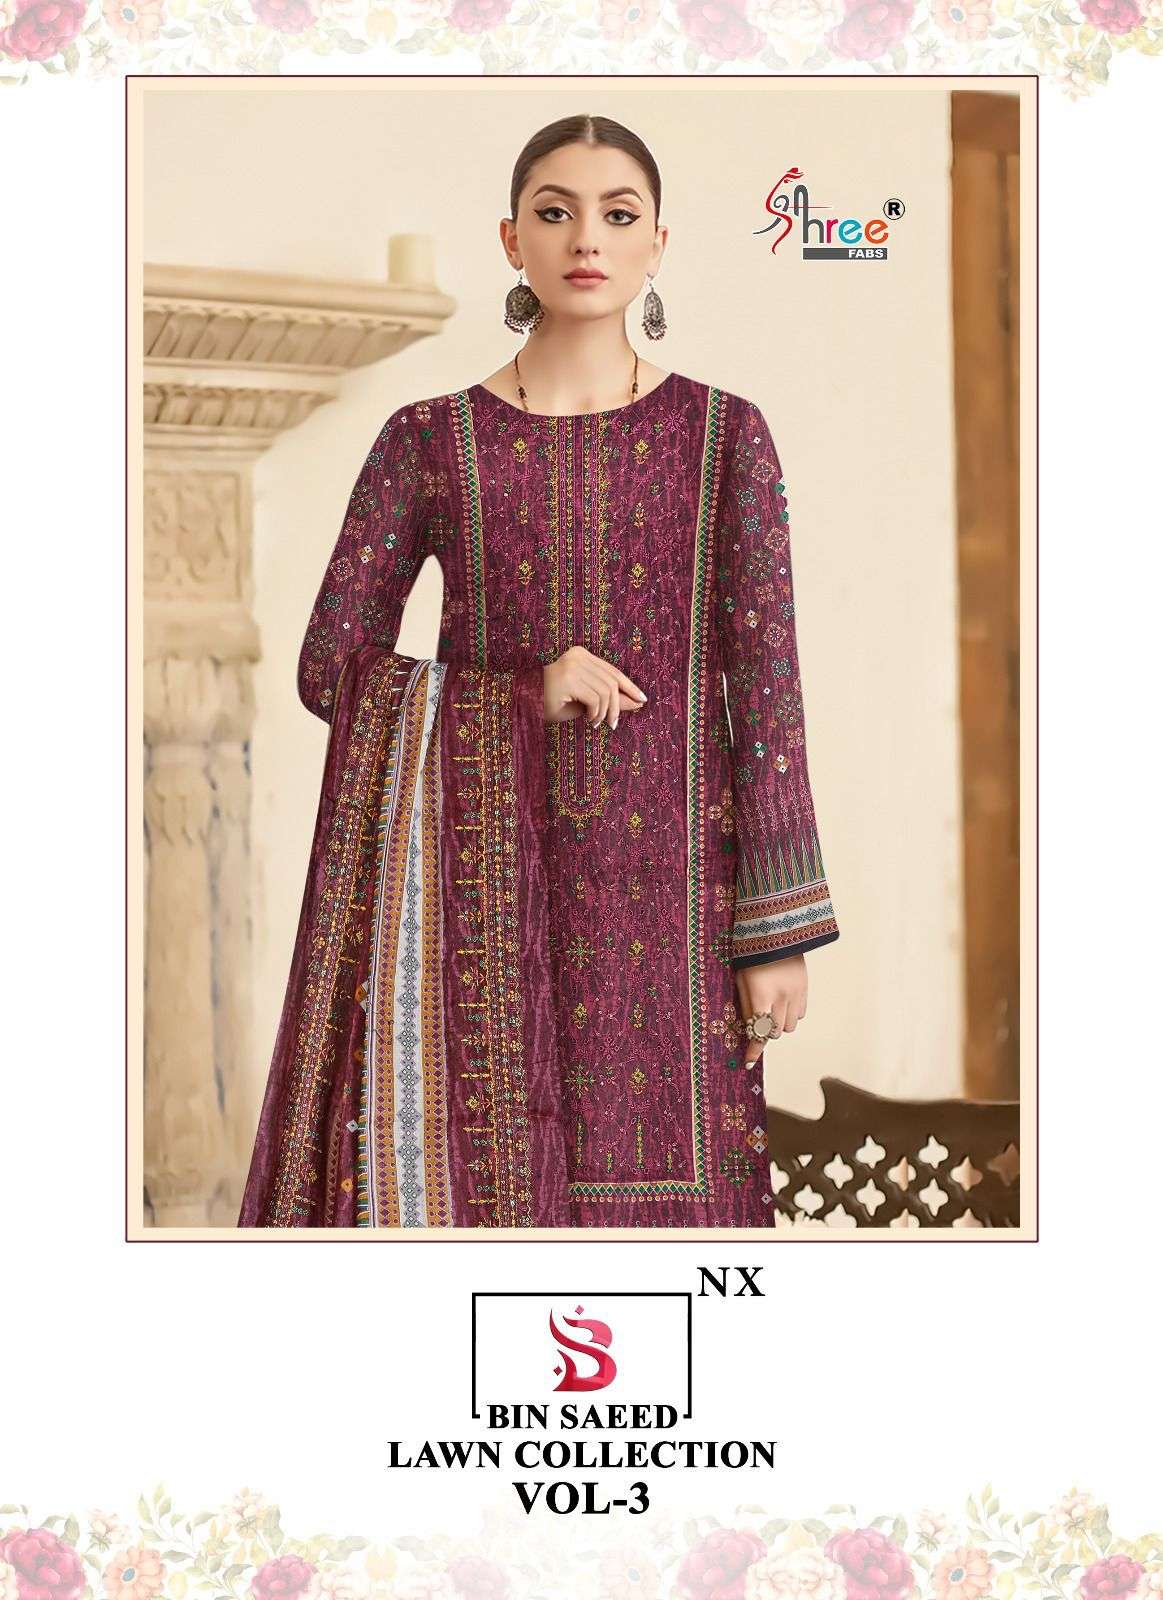 SHREE FAB BIN SAEED LAWN COLLECTION VOL 3NX DESIGNER LAWN COTTON PRINT WITH EMBROIDERY WORK HEAVY SUITS IN BEST WHOLESALE RATE